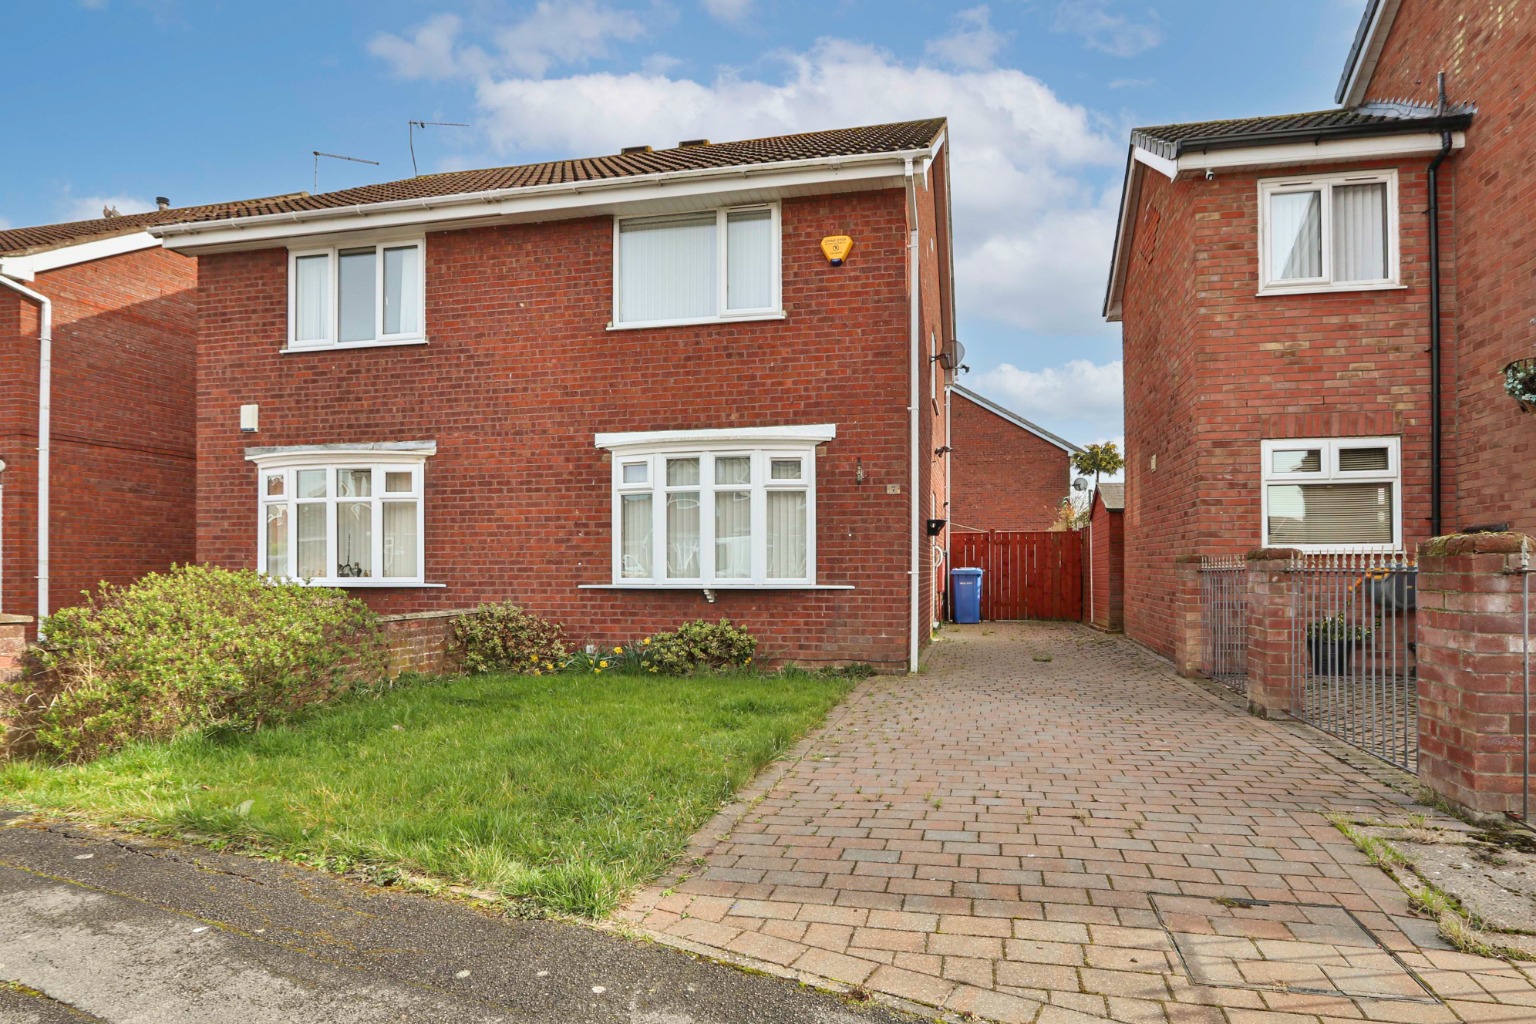 2 bed semi-detached house for sale in Chestnut Avenue, Hull - Property Image 1